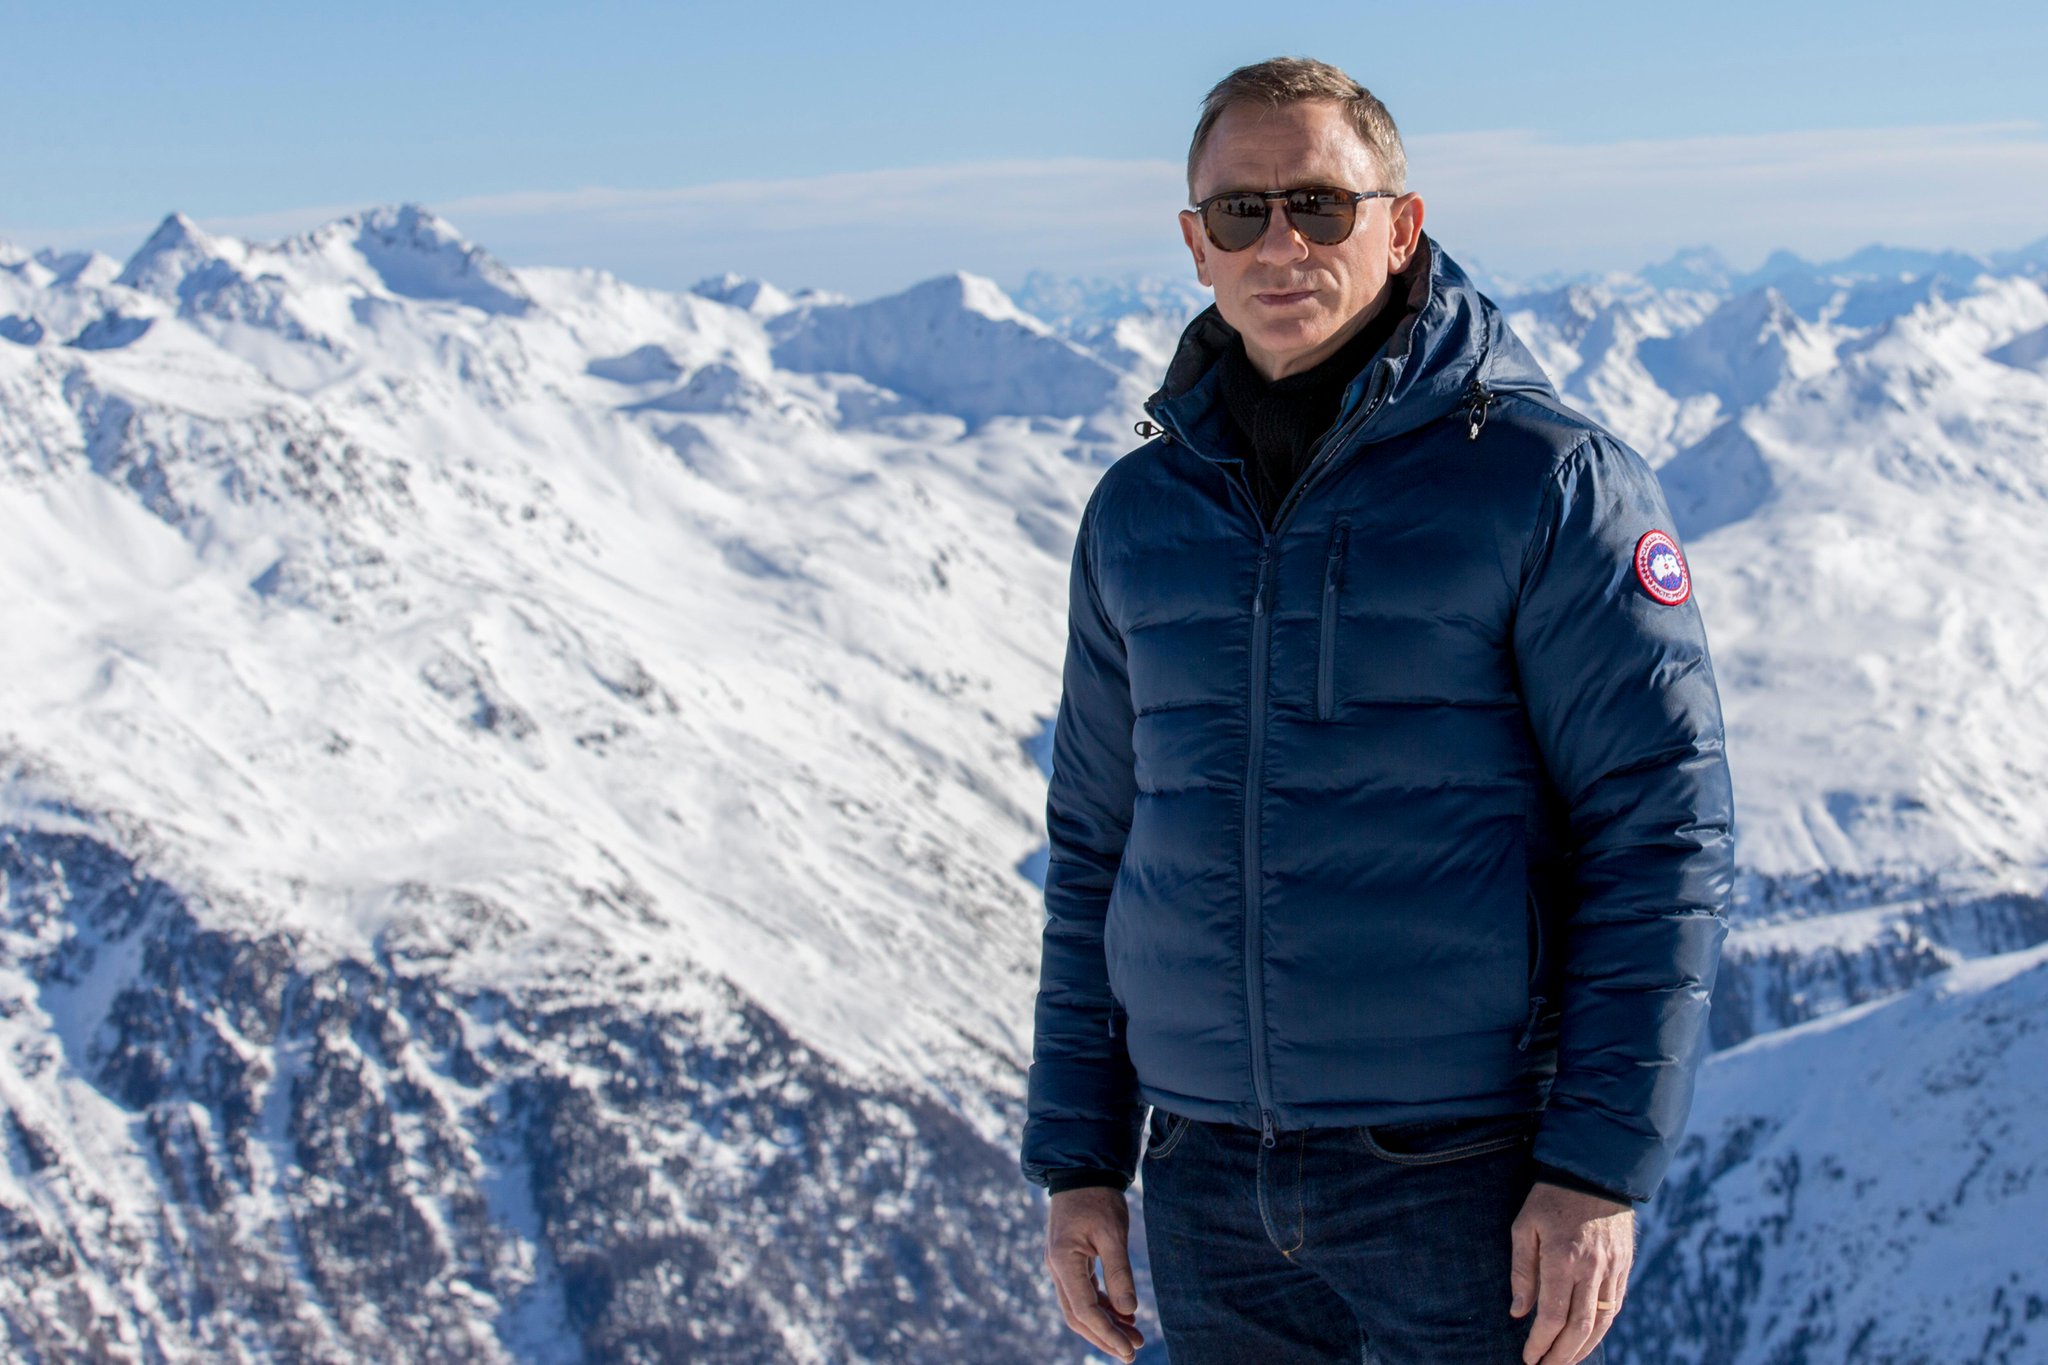 Happy 47th Bday to actor Daniel Craig!

He is currently on set now shooting the 24th James Bond installment, Spectre. 